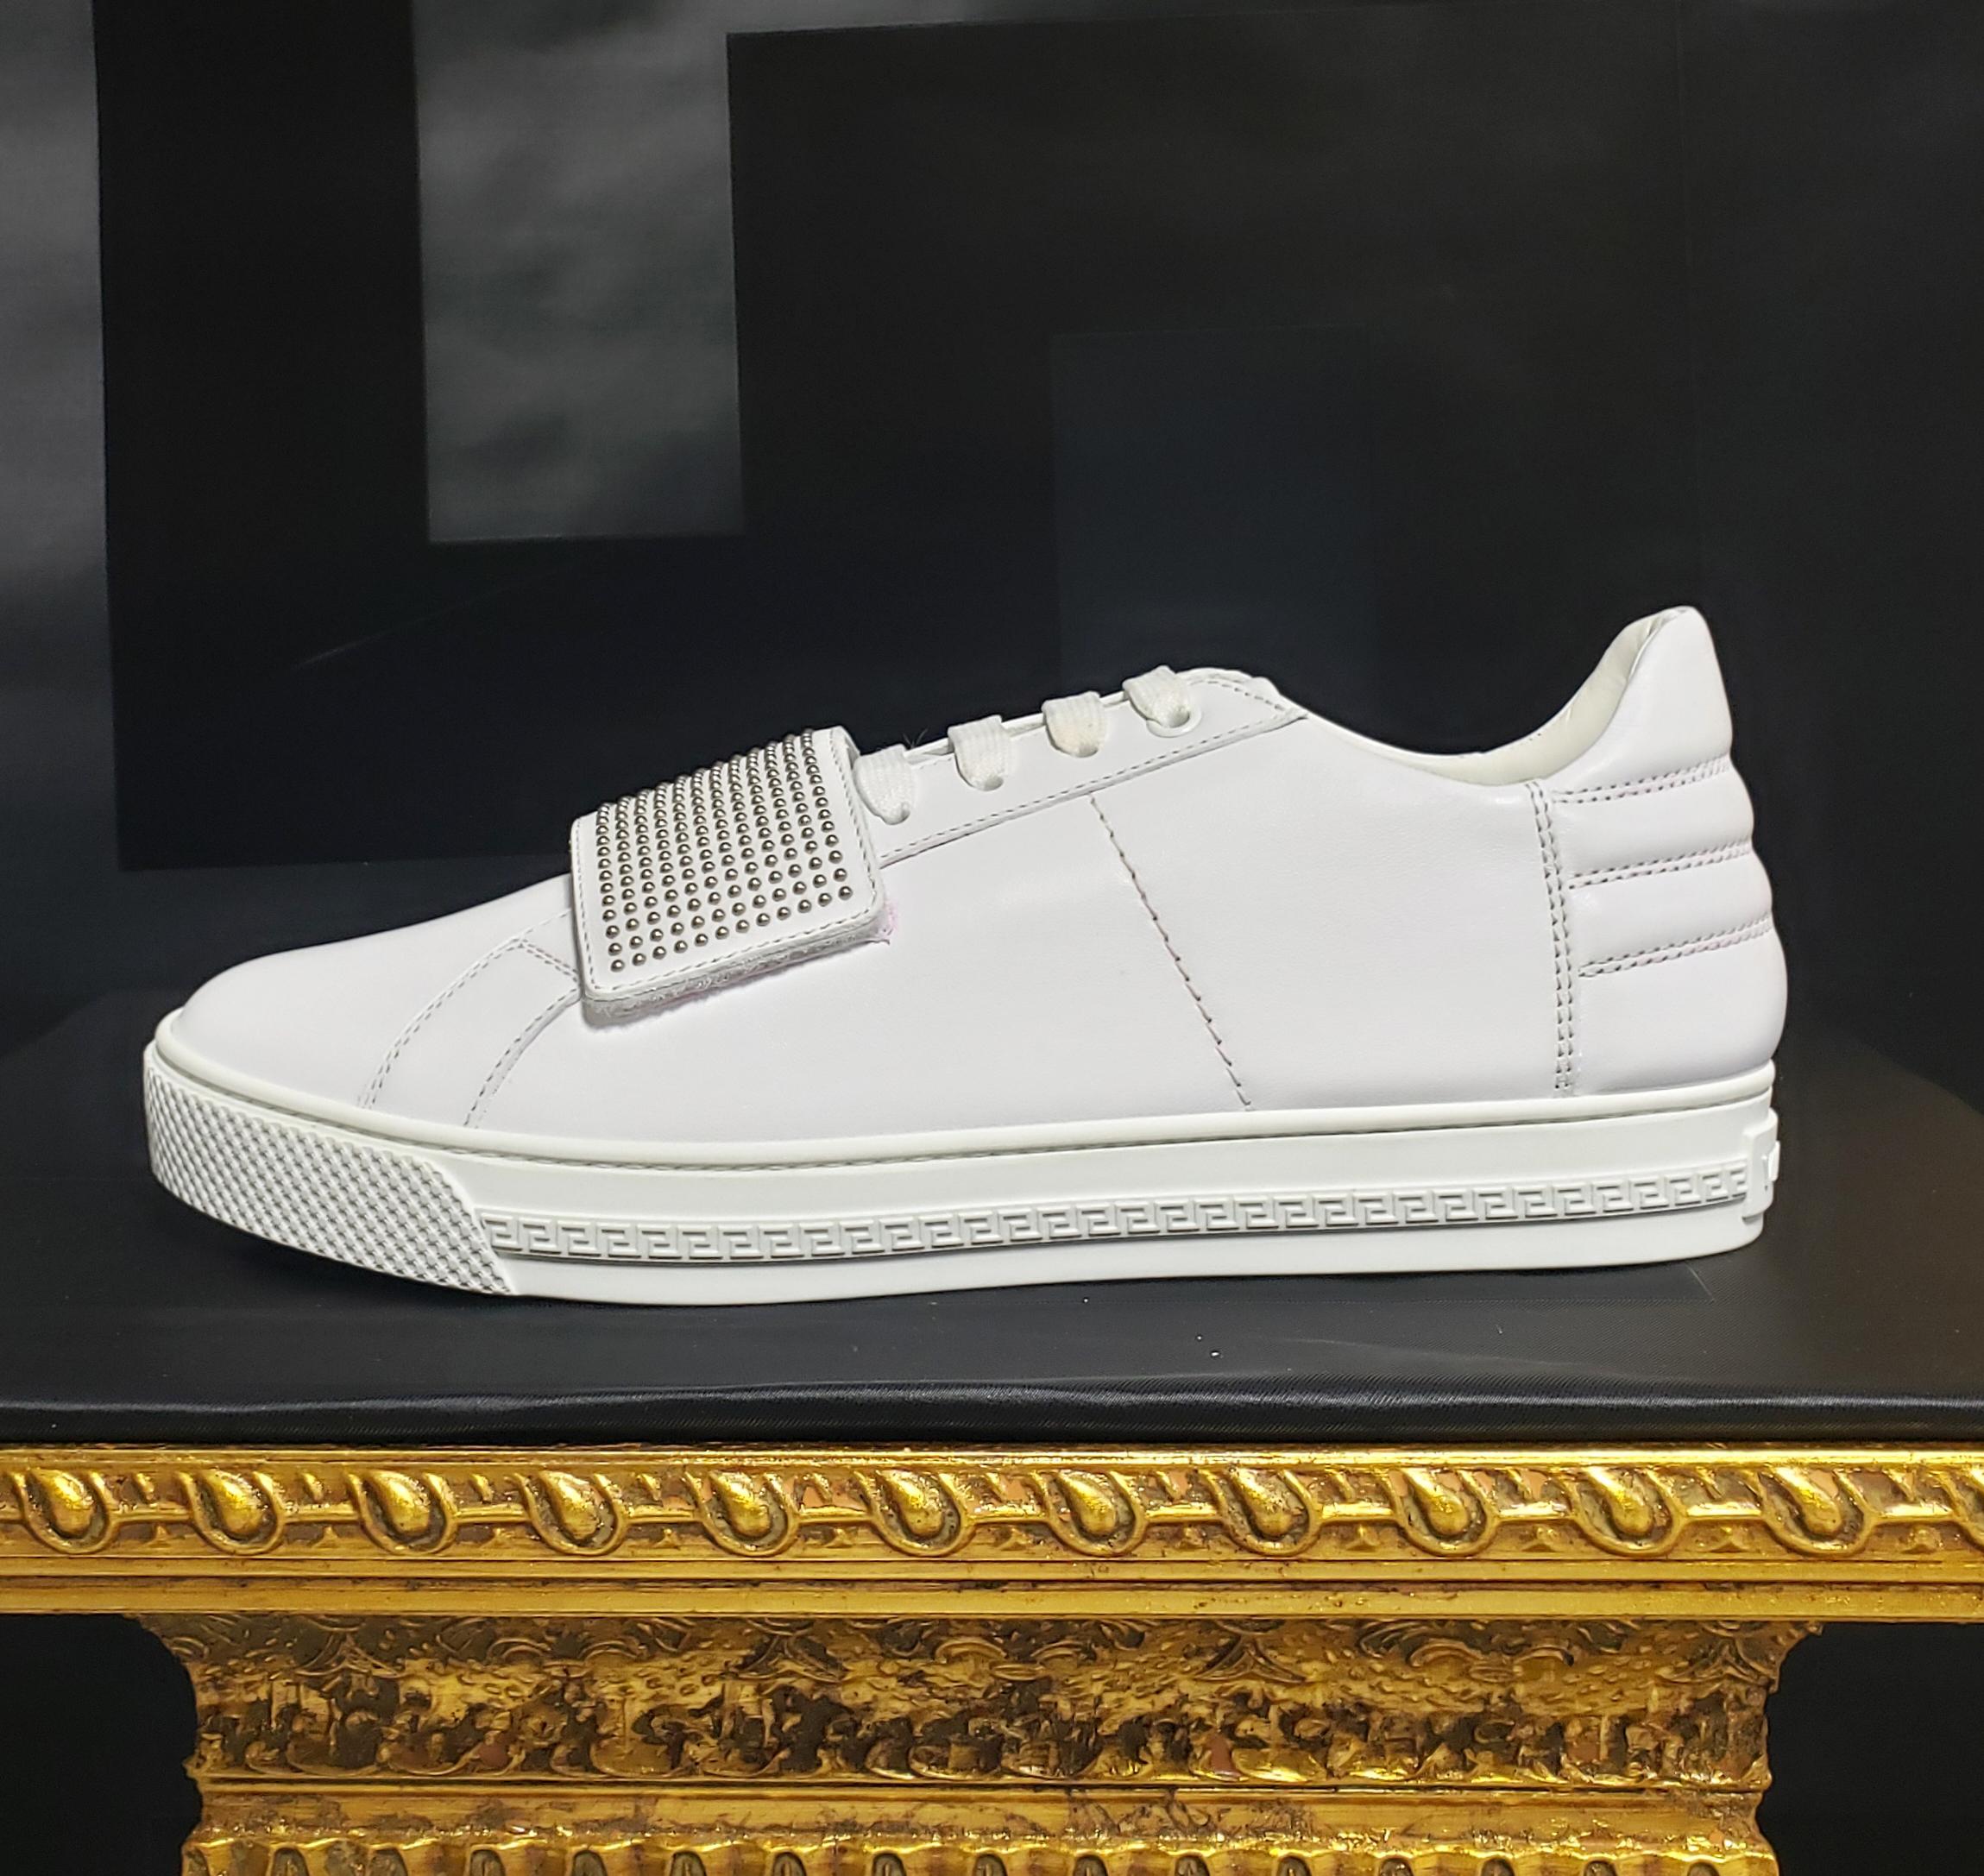 NEW VERSACE WHITE LEATHER SNEAKERS with a STUDDED BUCKLE 40 - 7 2